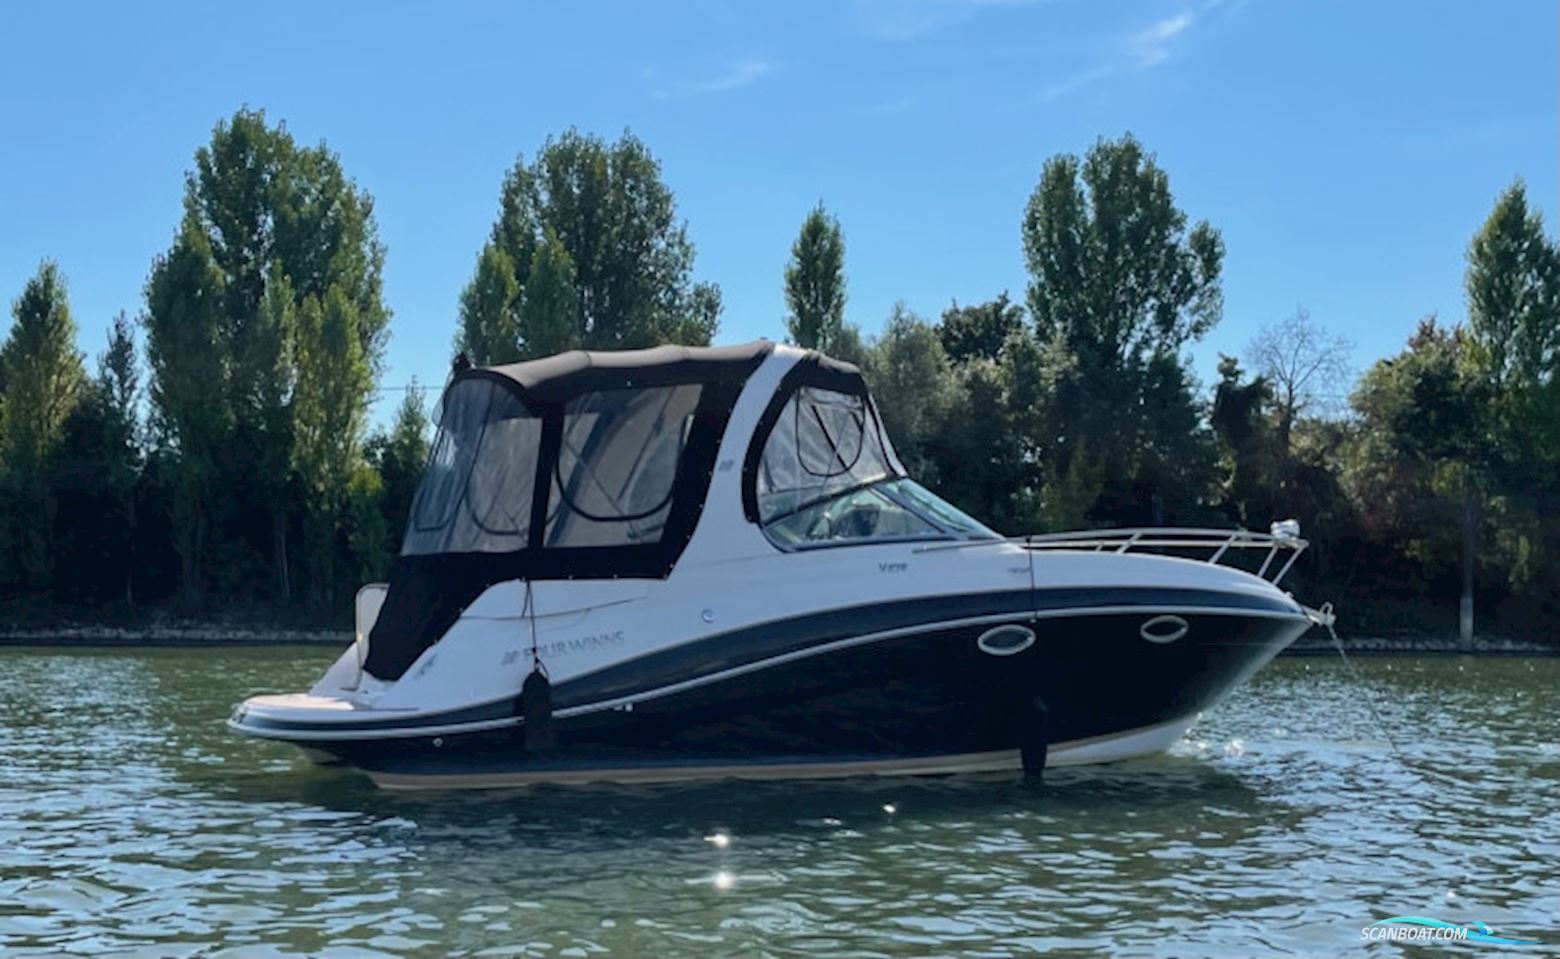 Four Winns 278 Vista Motor boat 2008, with Mercruiser 5,7 L V8 Mpi 350 Mag Bravo 3 Duoprop engine, Germany